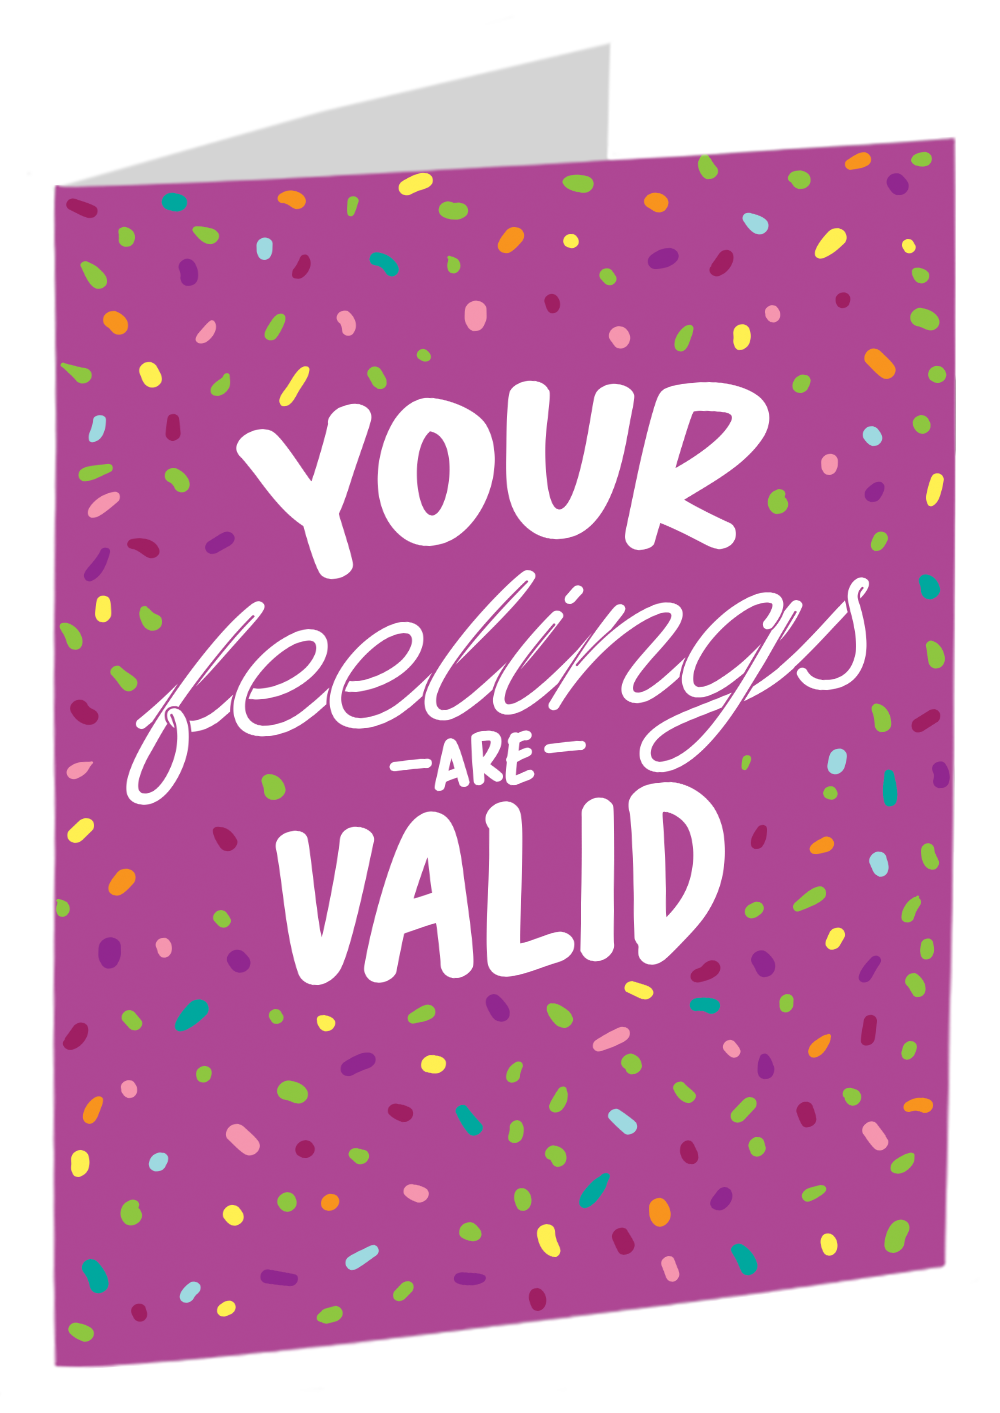 "Your Feelings Are Valid"